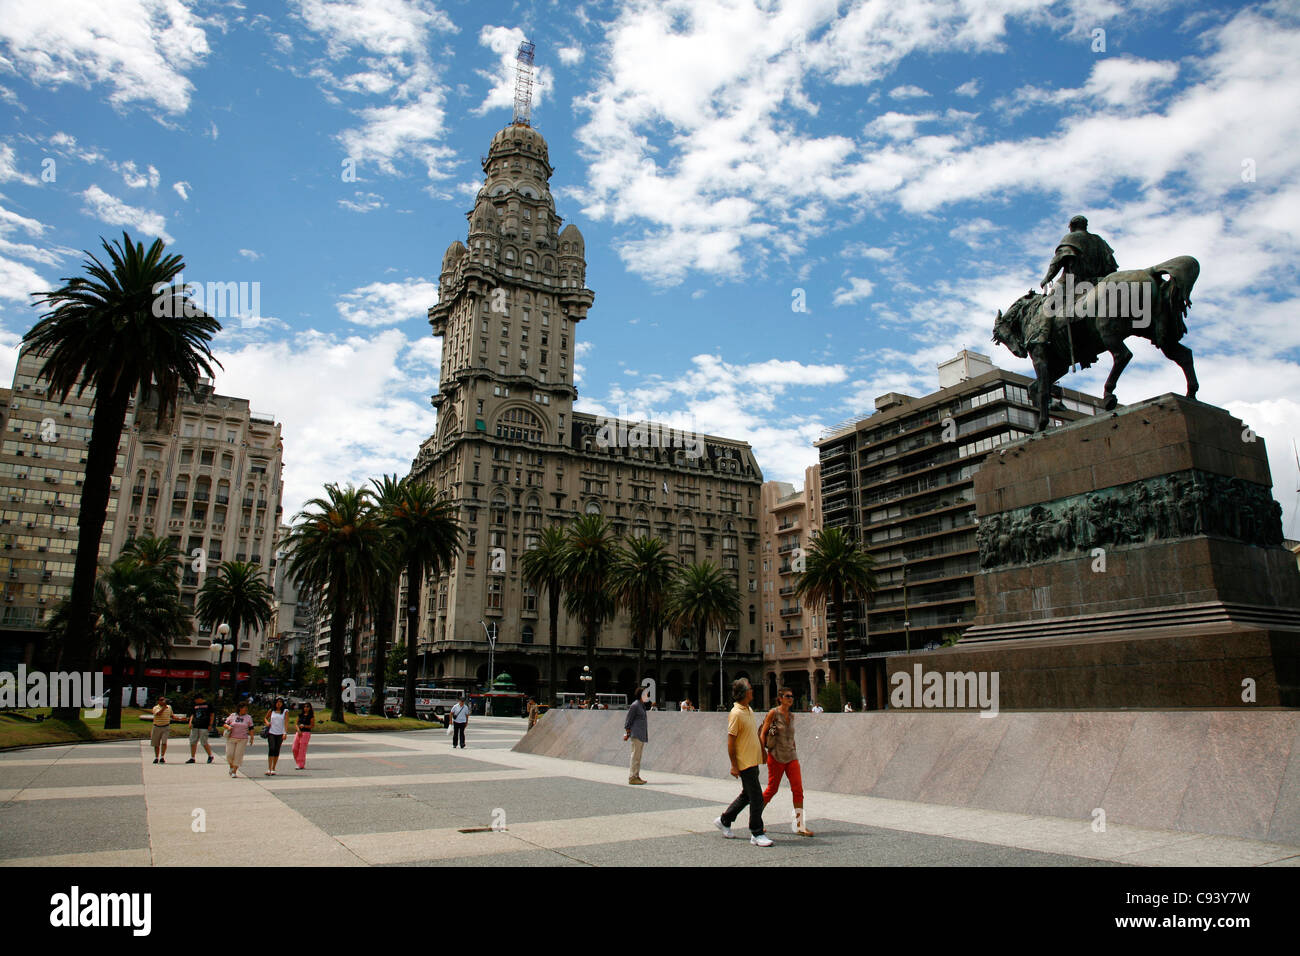 Plaza Independencia, the main city square in the old town, Montevideo, Uruguay. Stock Photo